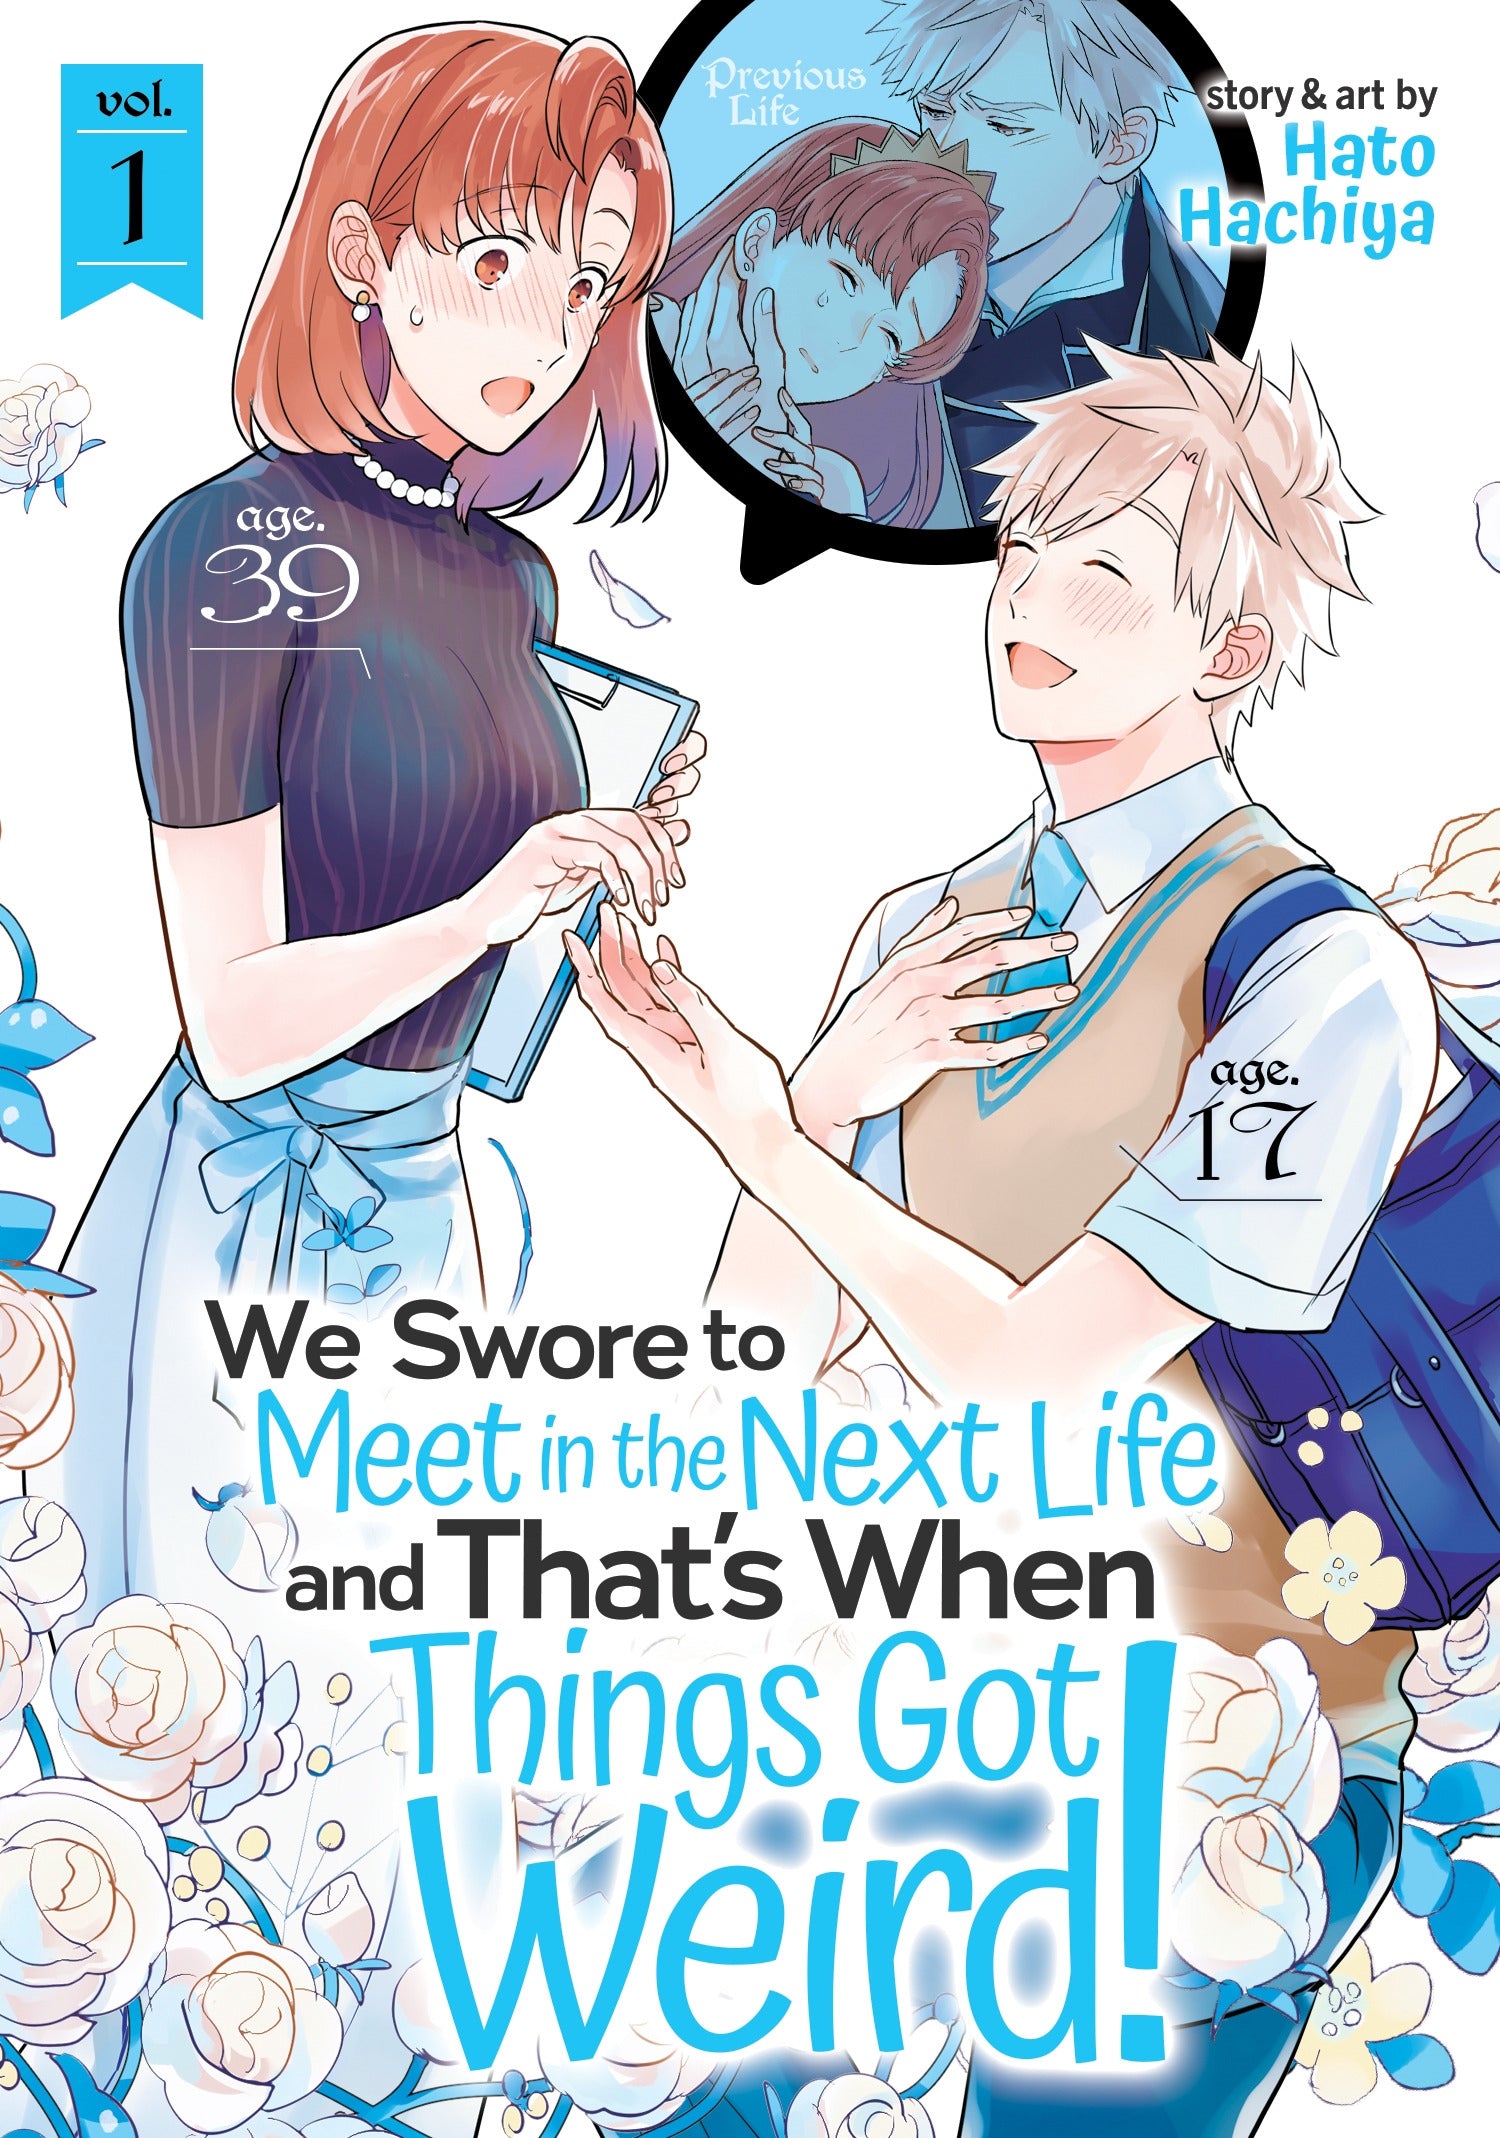 We Swore to Meet in the Next Life and That's When Things Got Weird! Vol. 1 - Manga Warehouse